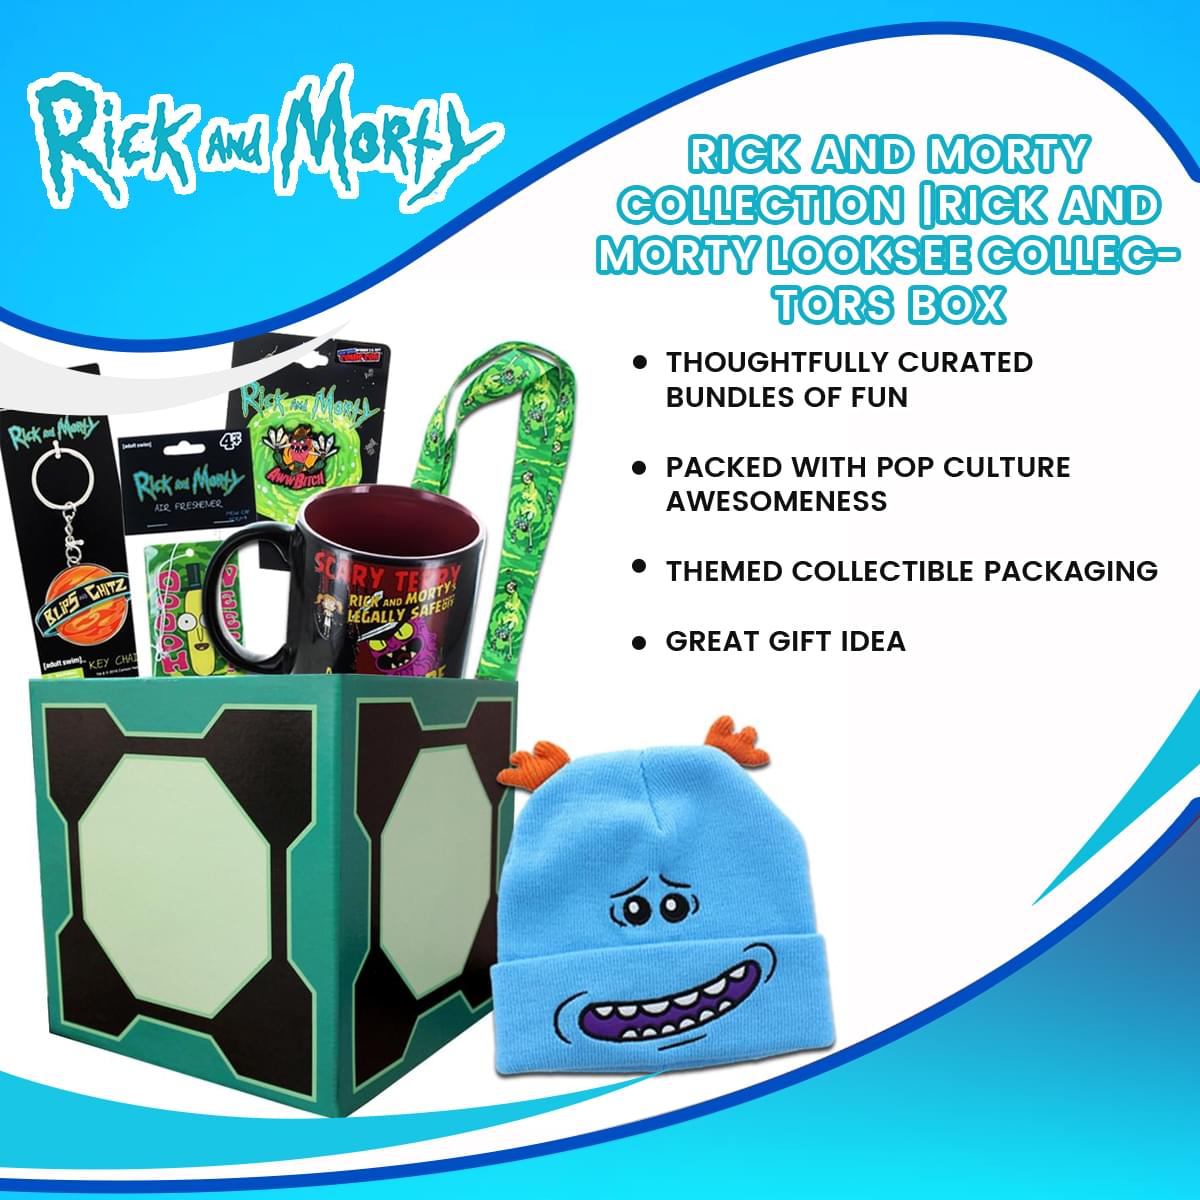 Rick and Morty Collection |Rick and Morty Mystery Box